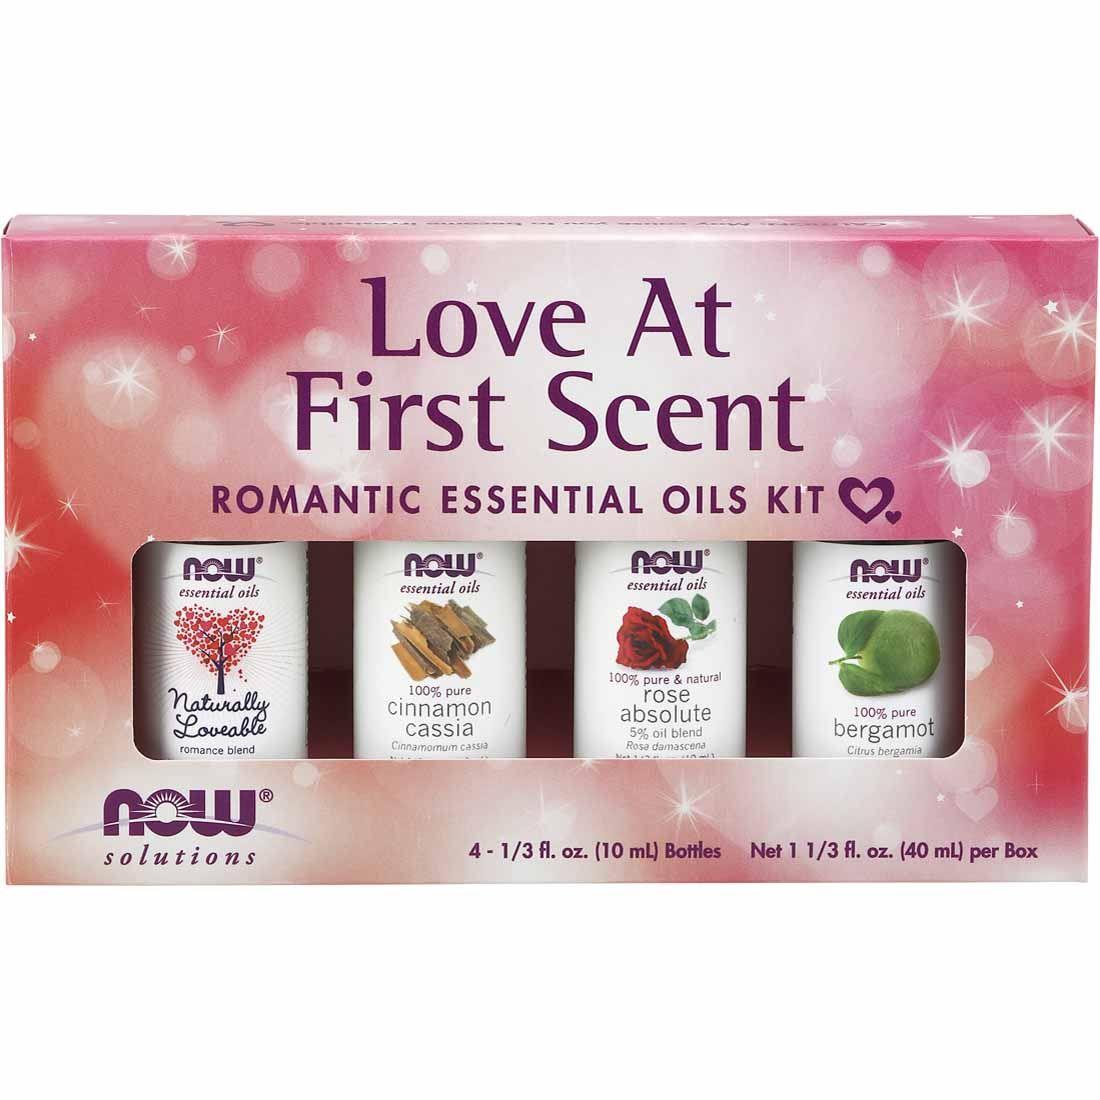 Love at First Scent Essential Oils Kit